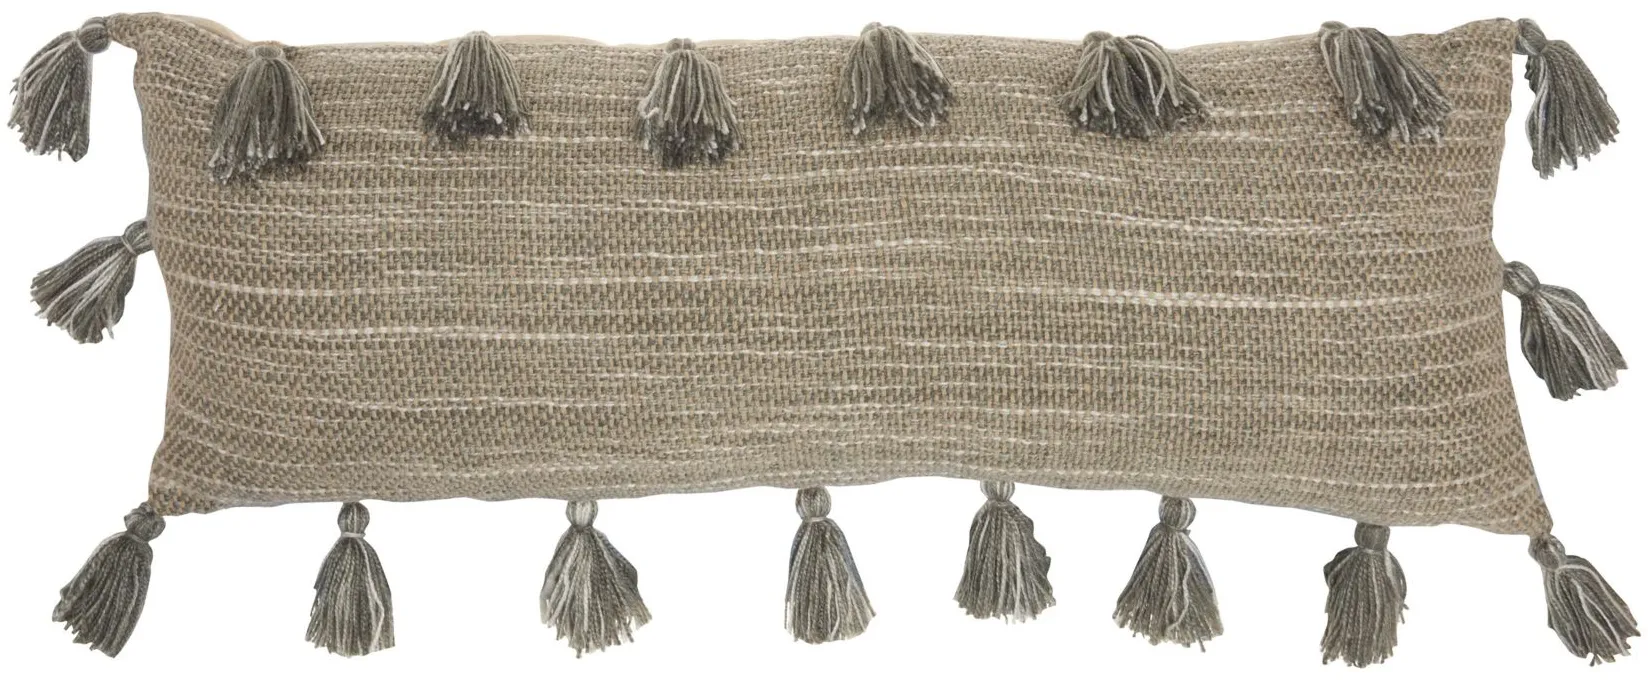 Mina Victory Woven With Tassels Rectangular Throw Pillow in Charcoal by Nourison